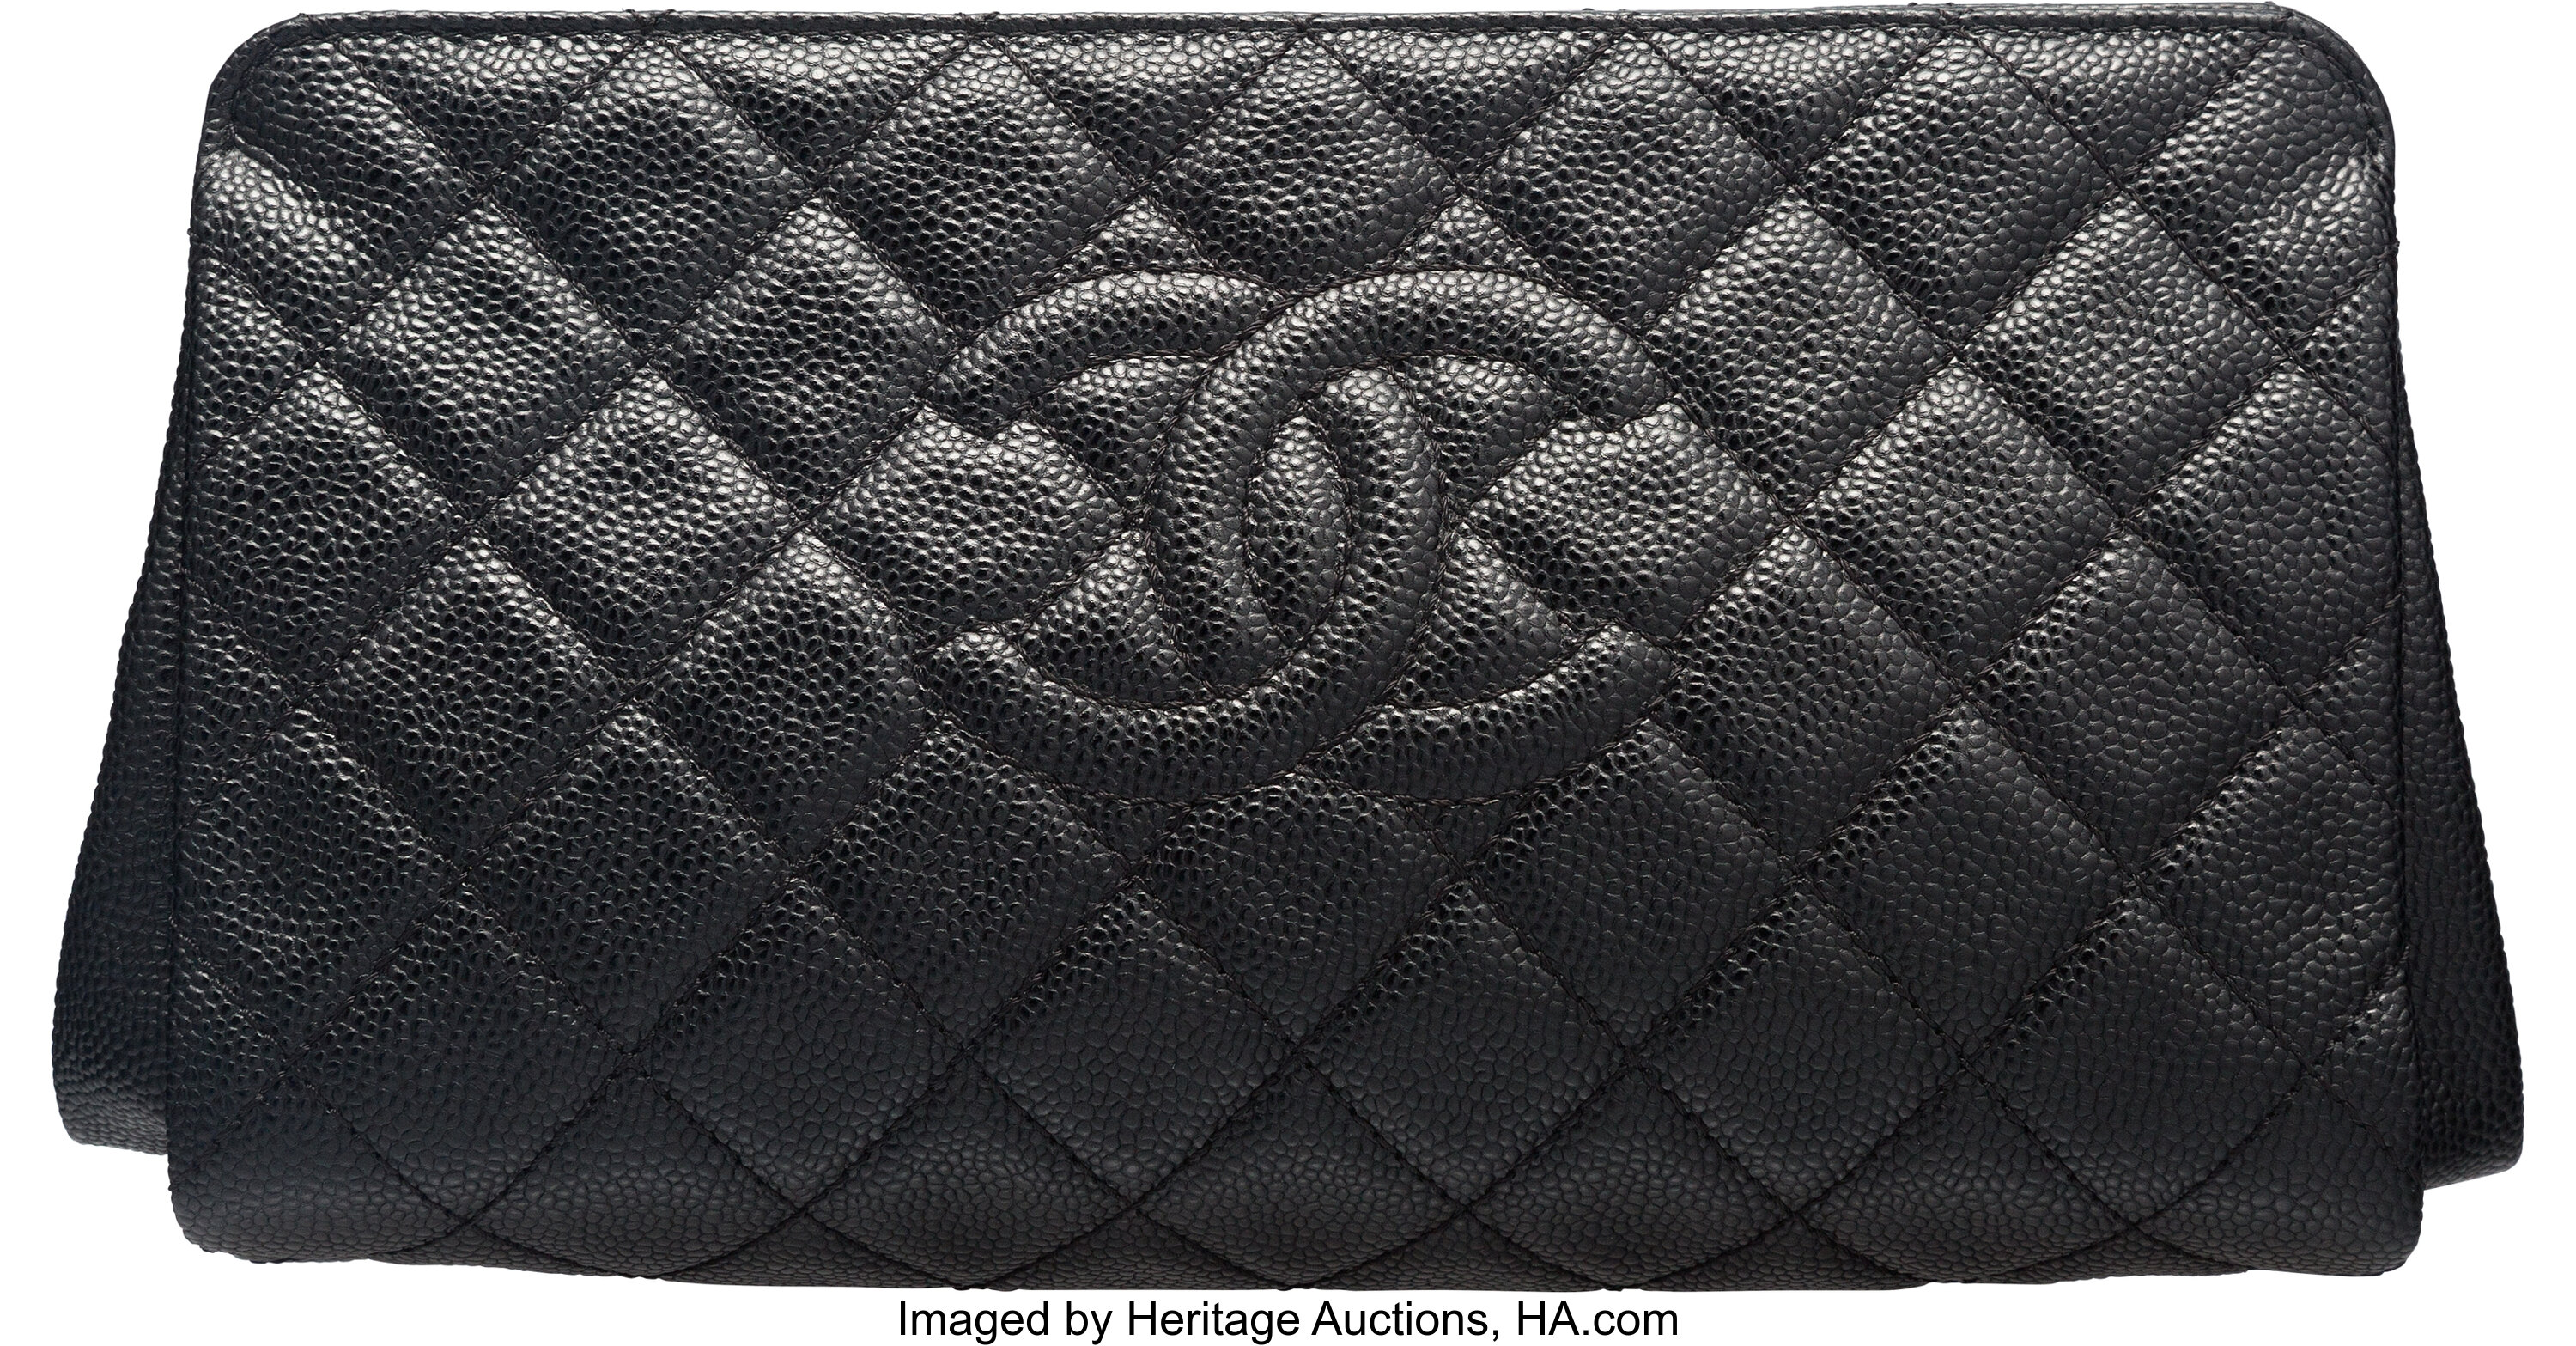 Chanel Black Quilted Jumbo CC Bag. 3. 12" | Lot | Heritage Auctions